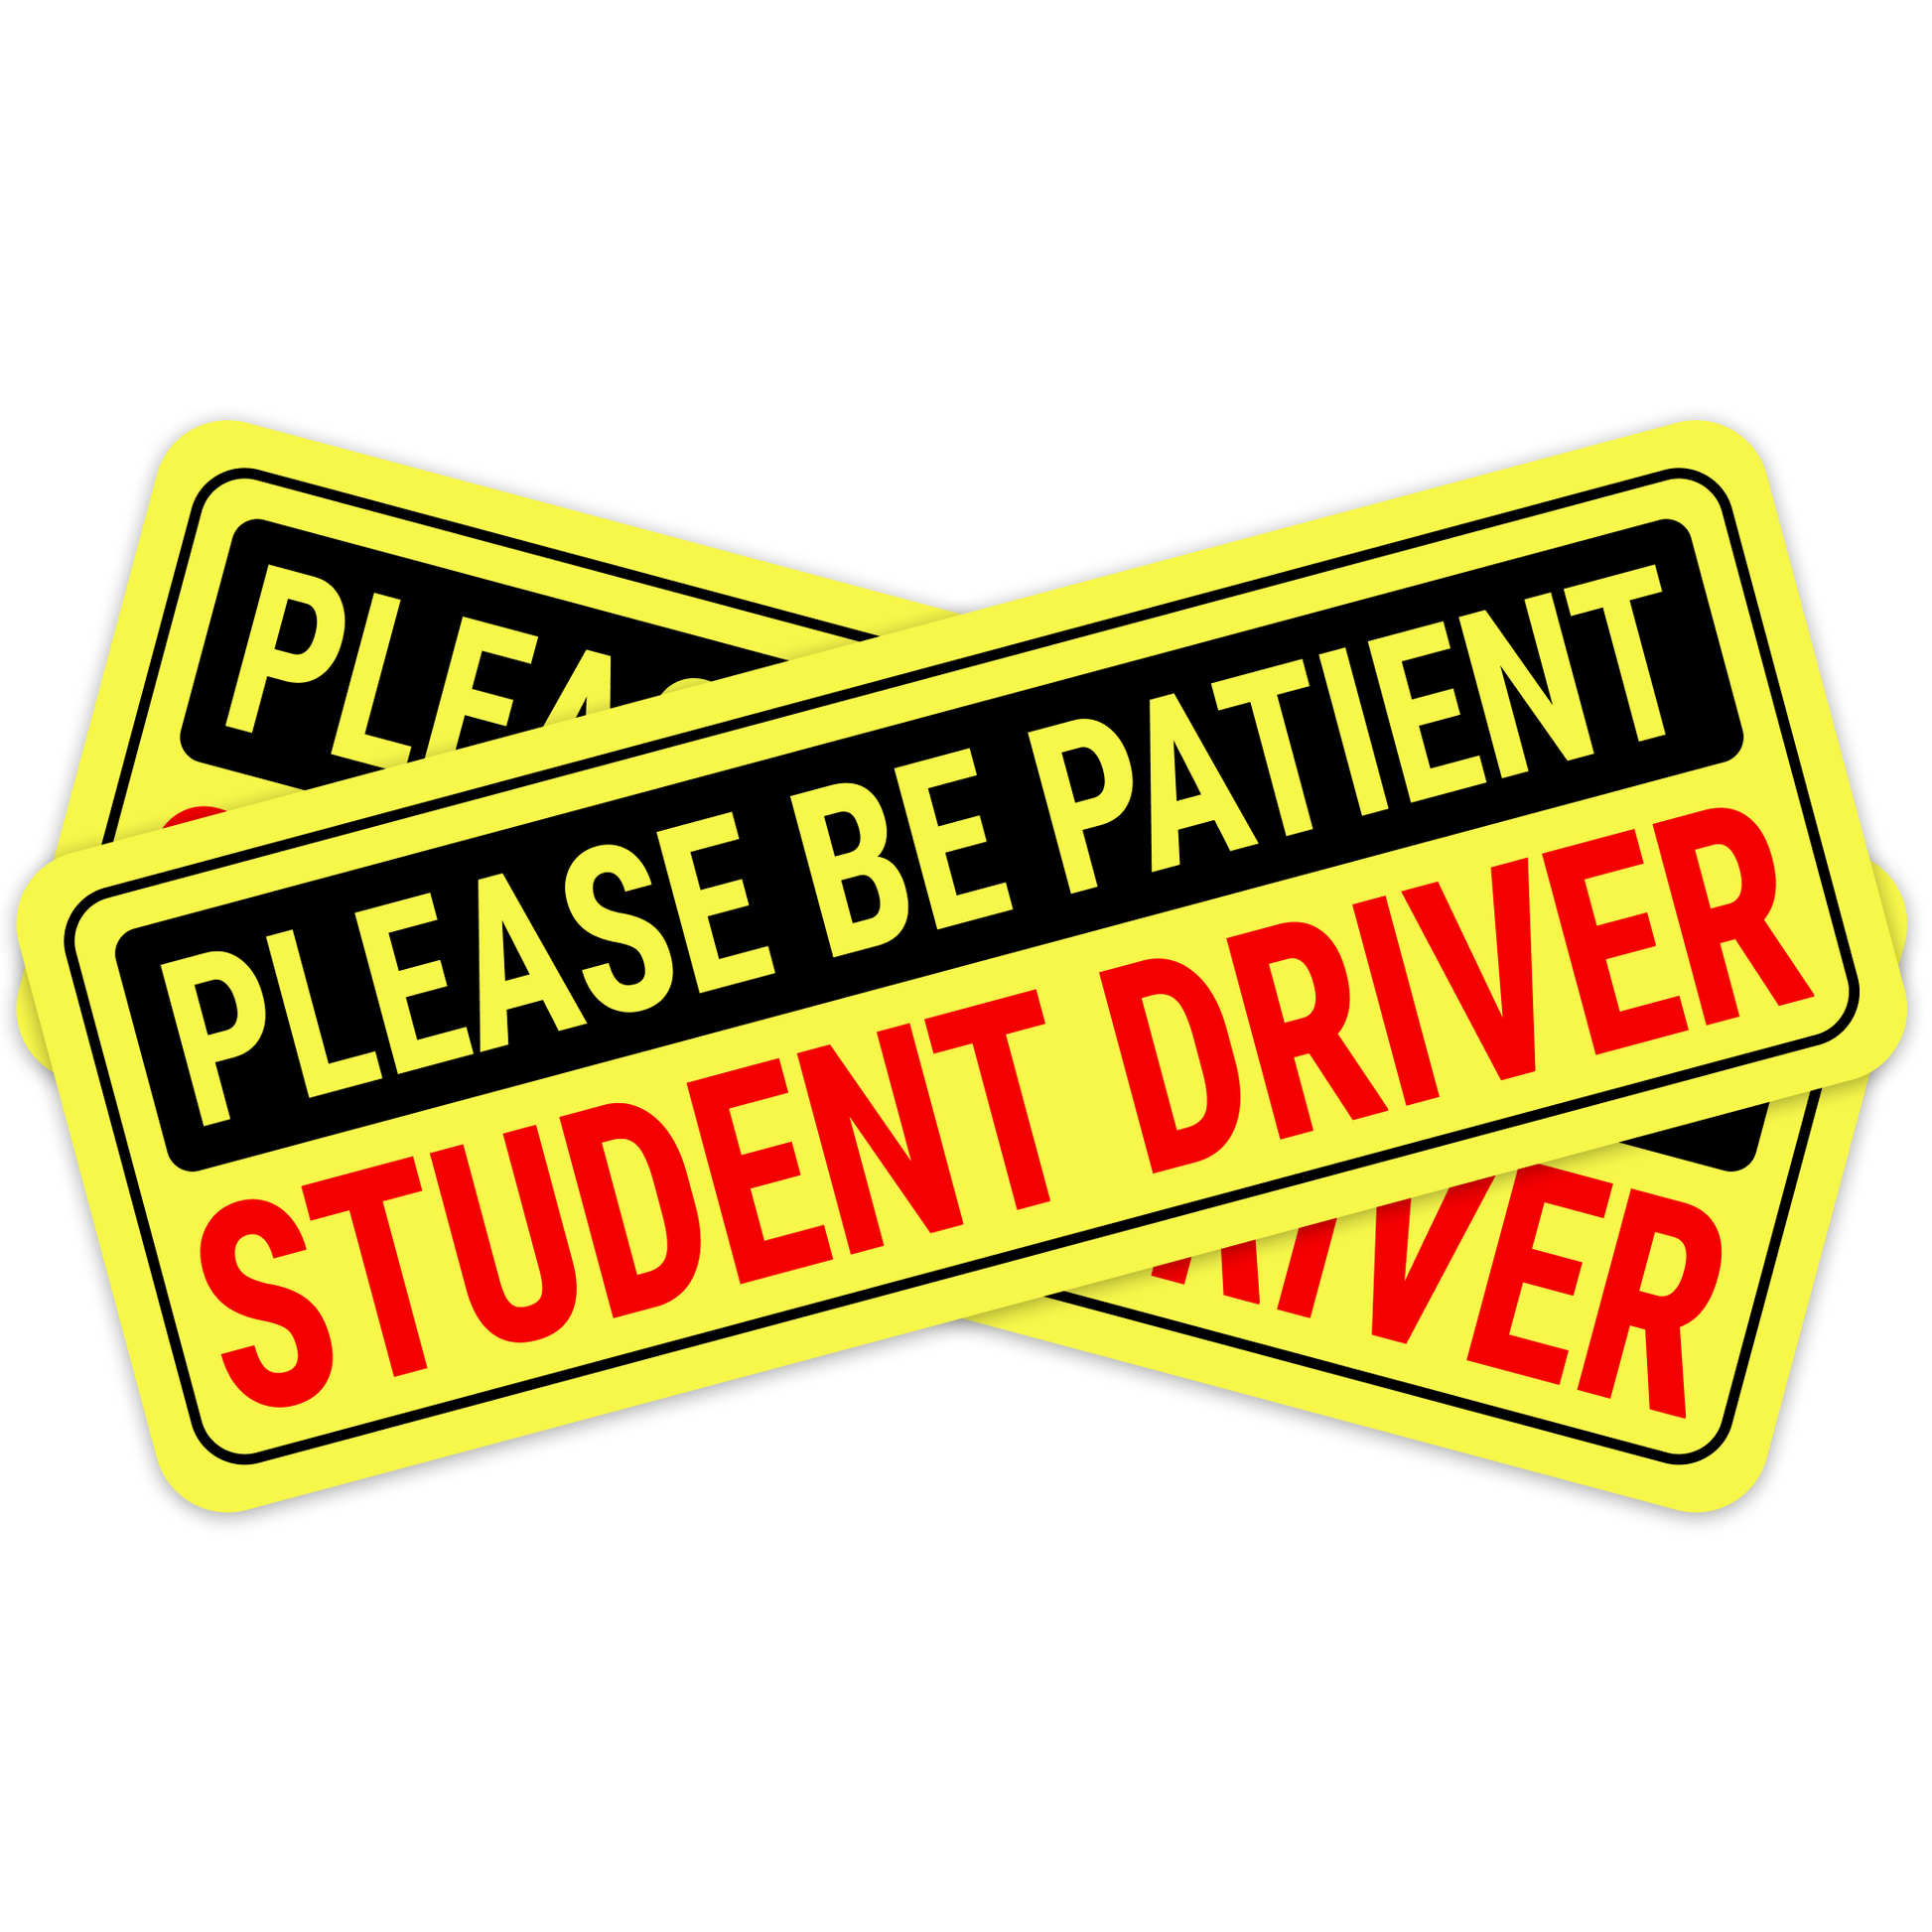 Student Driver Magnets 1 (2 Pack)